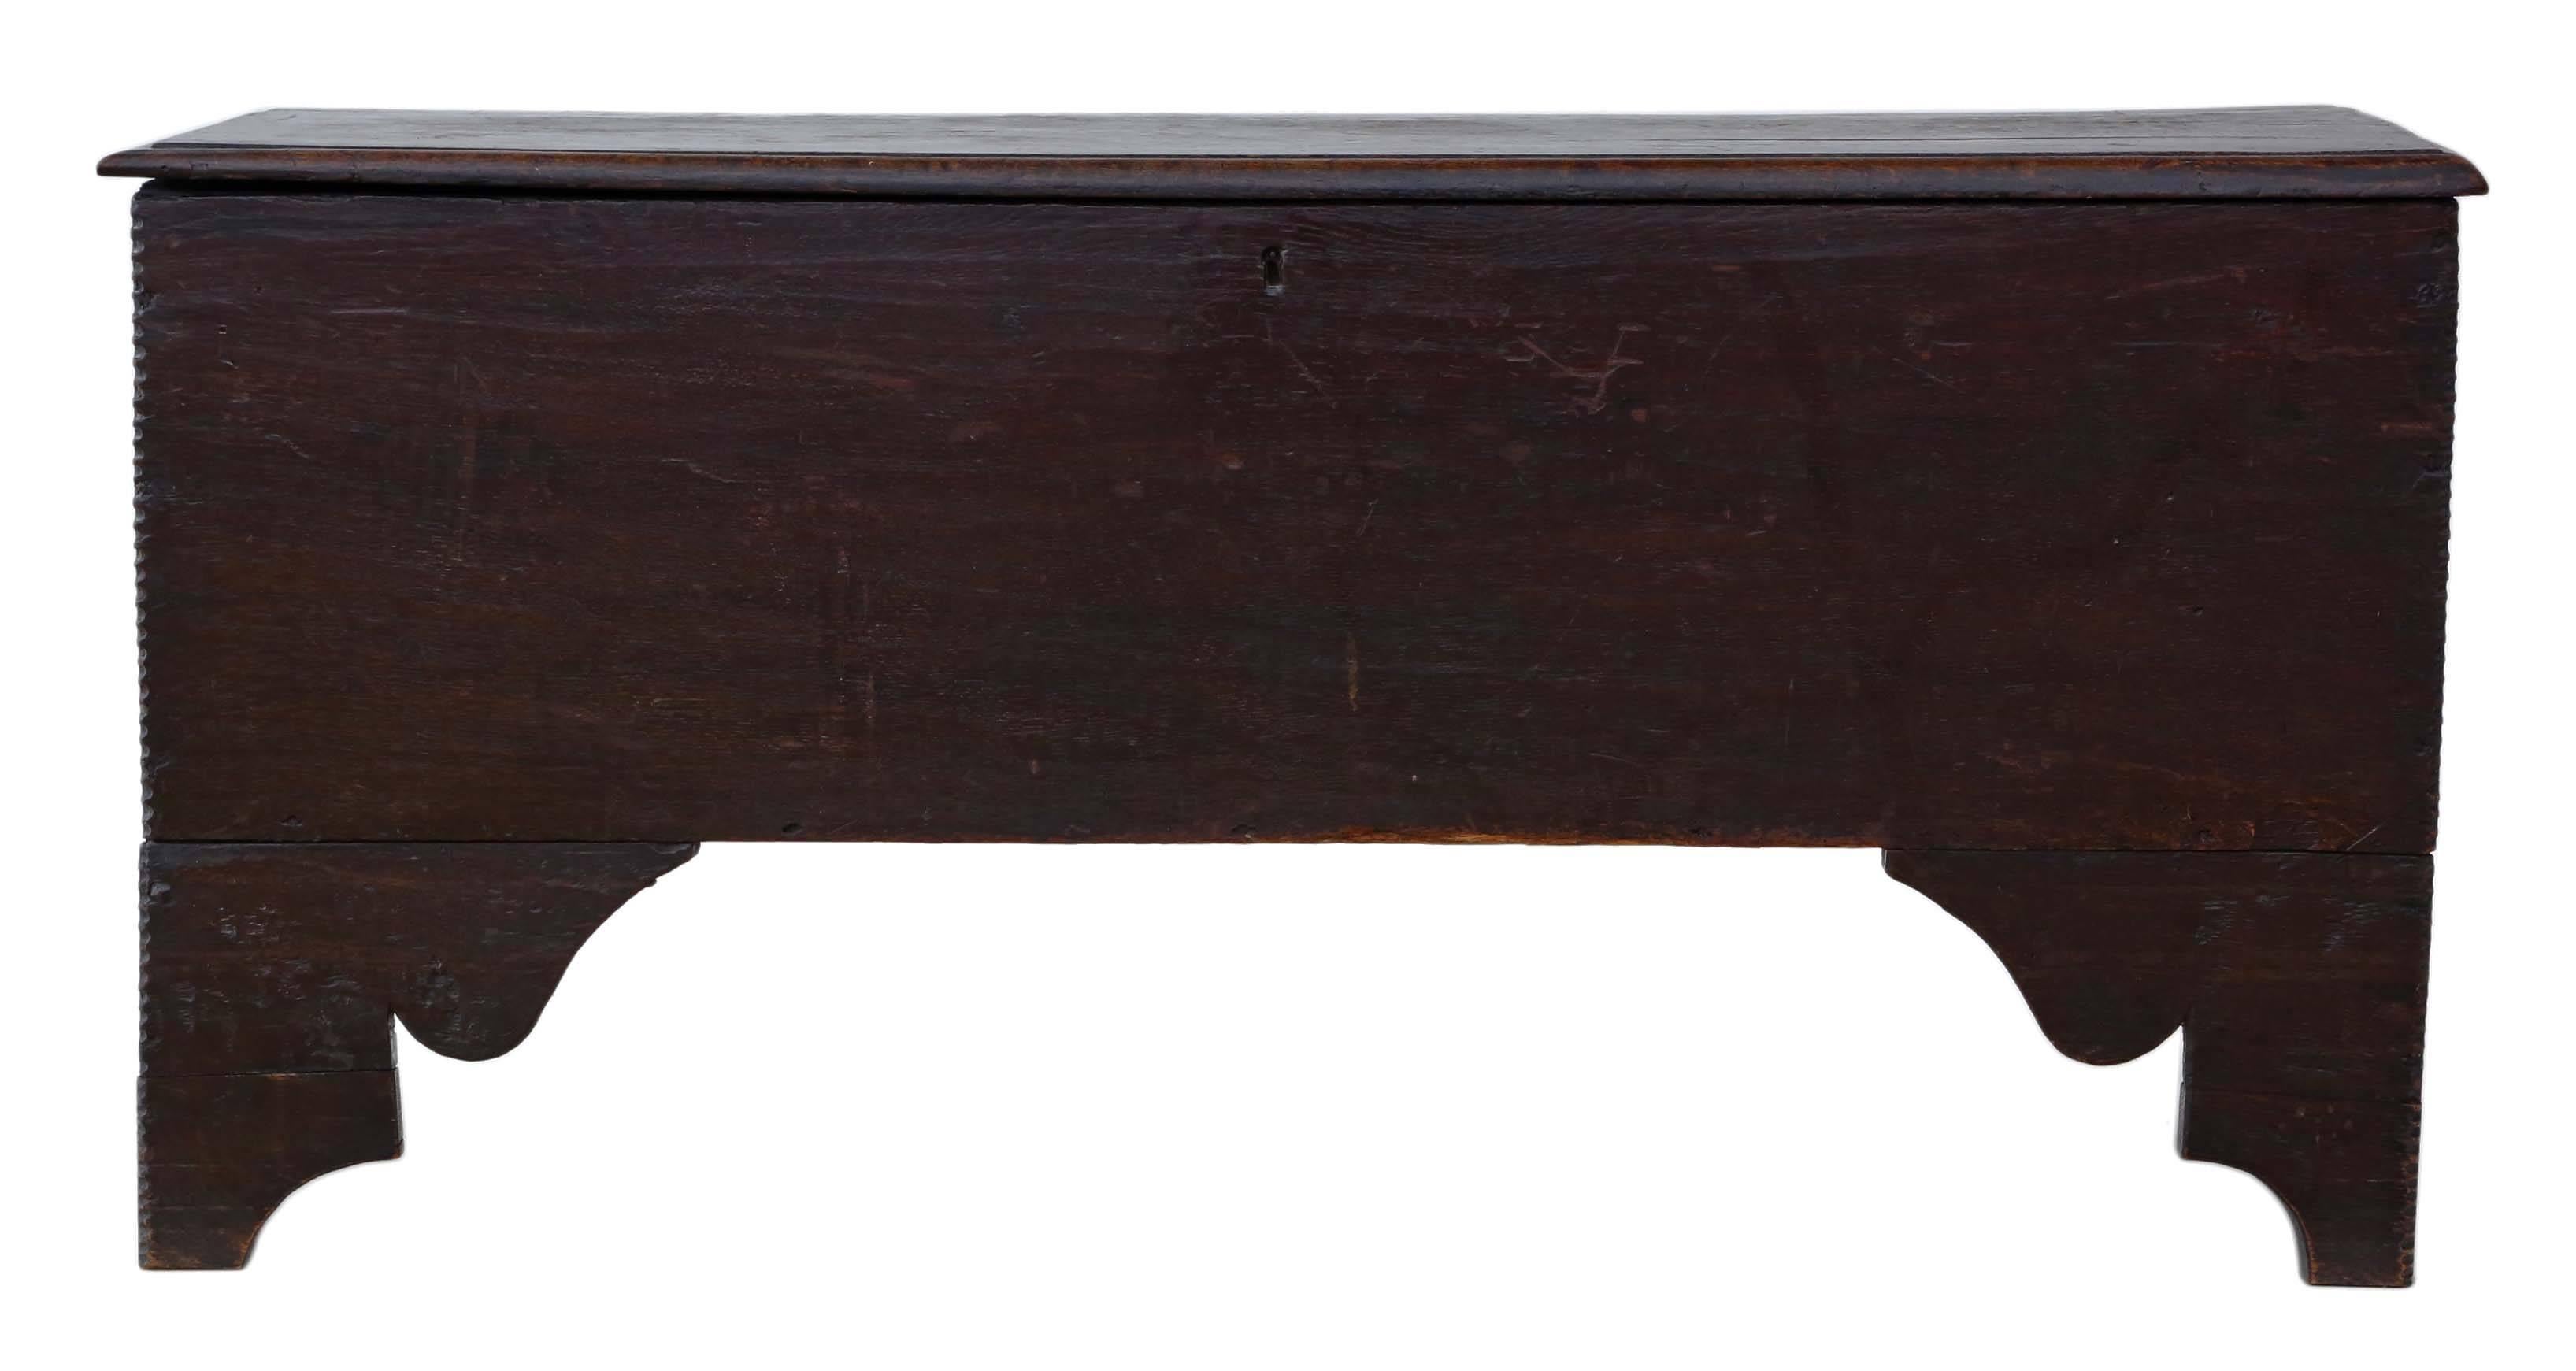 Antique Georgian 18th century six-plank oak coffer.

Solid, heavy and strong, with no loose joints.

Would make a great ottoman, blanket chest, shoe store or coffee table.

Full of character and rustic country charm. 

Overall maximum